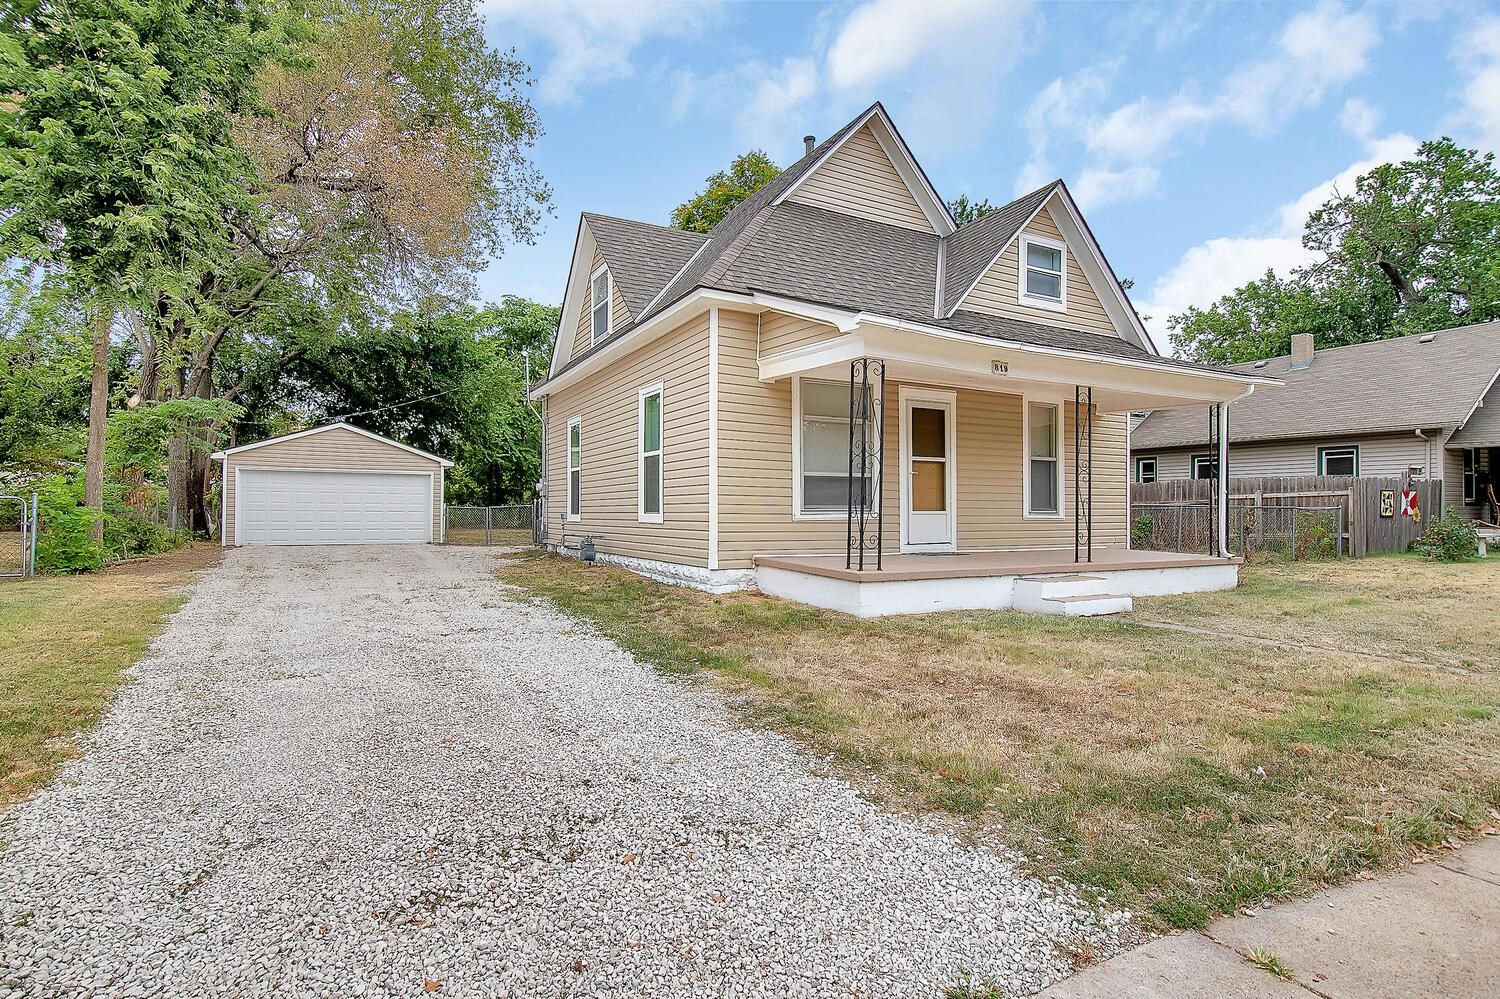 Come check out this fully remodeled 4 bedroom home in the heart of Wichita! This property has new fl